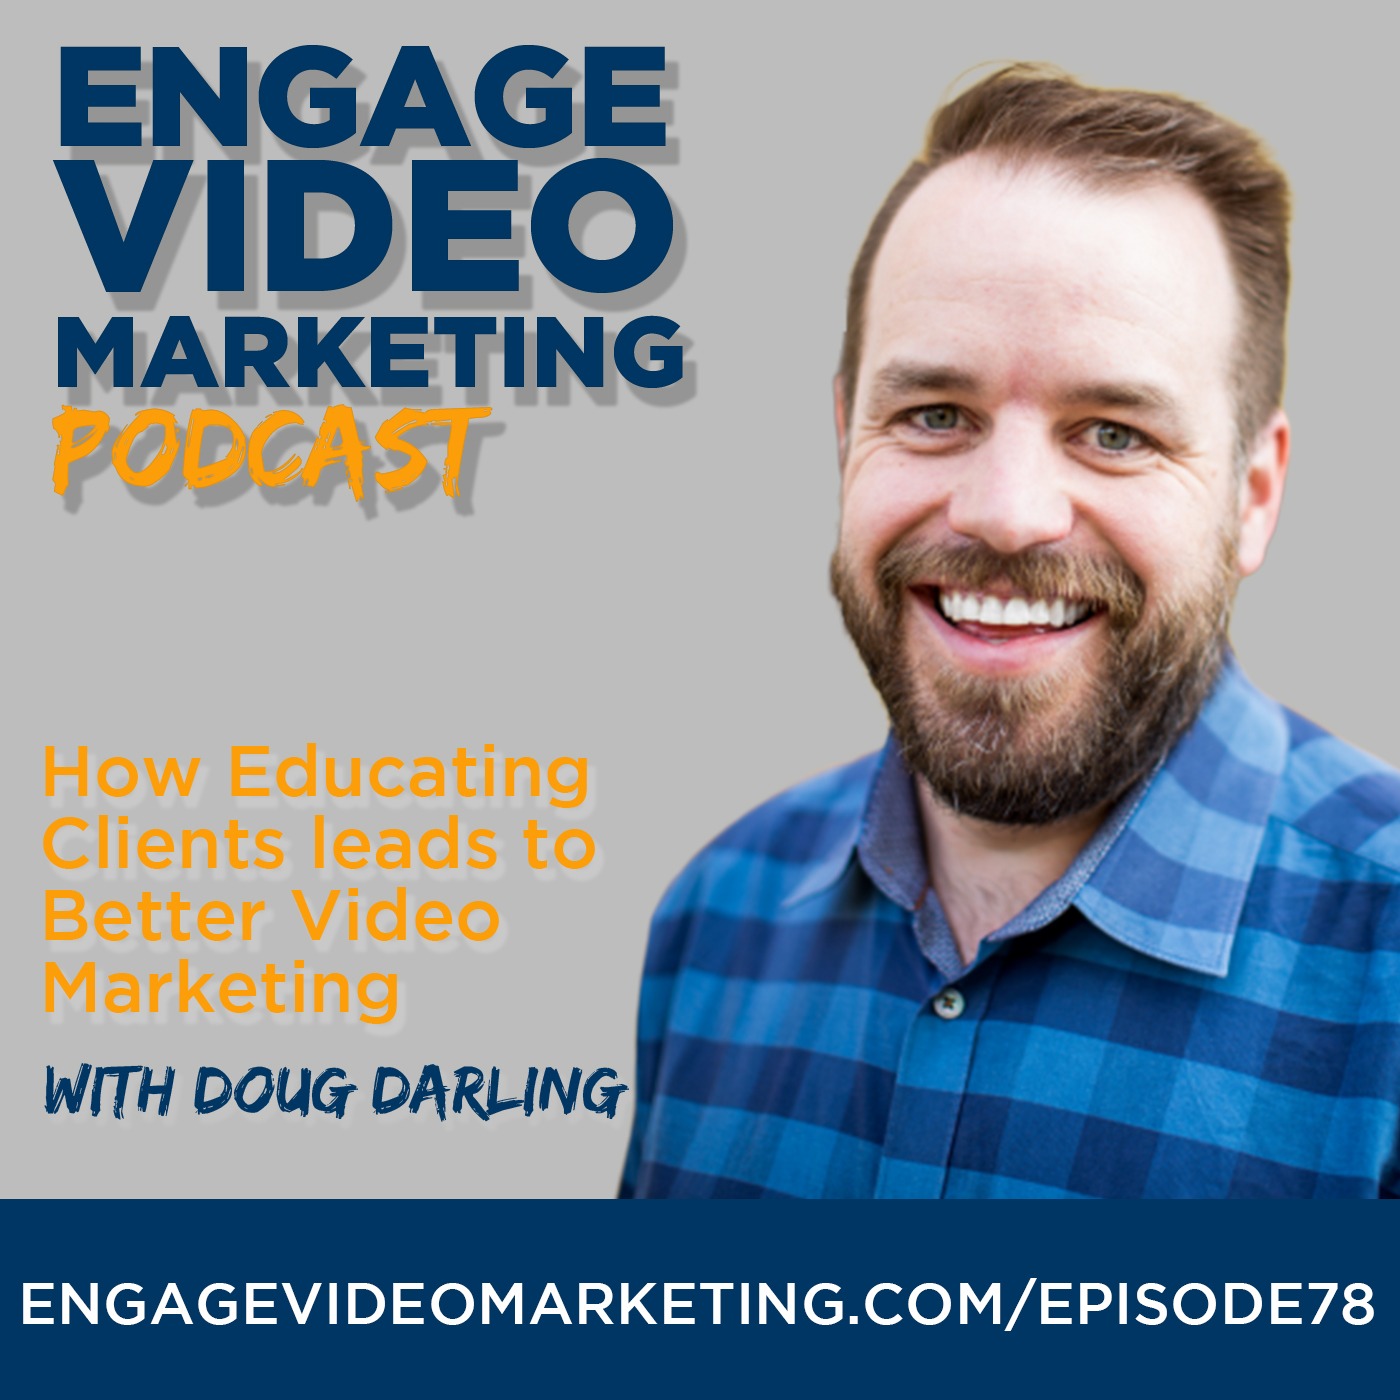 How Educating Clients Leads to Better Video Marketing with Doug Darling